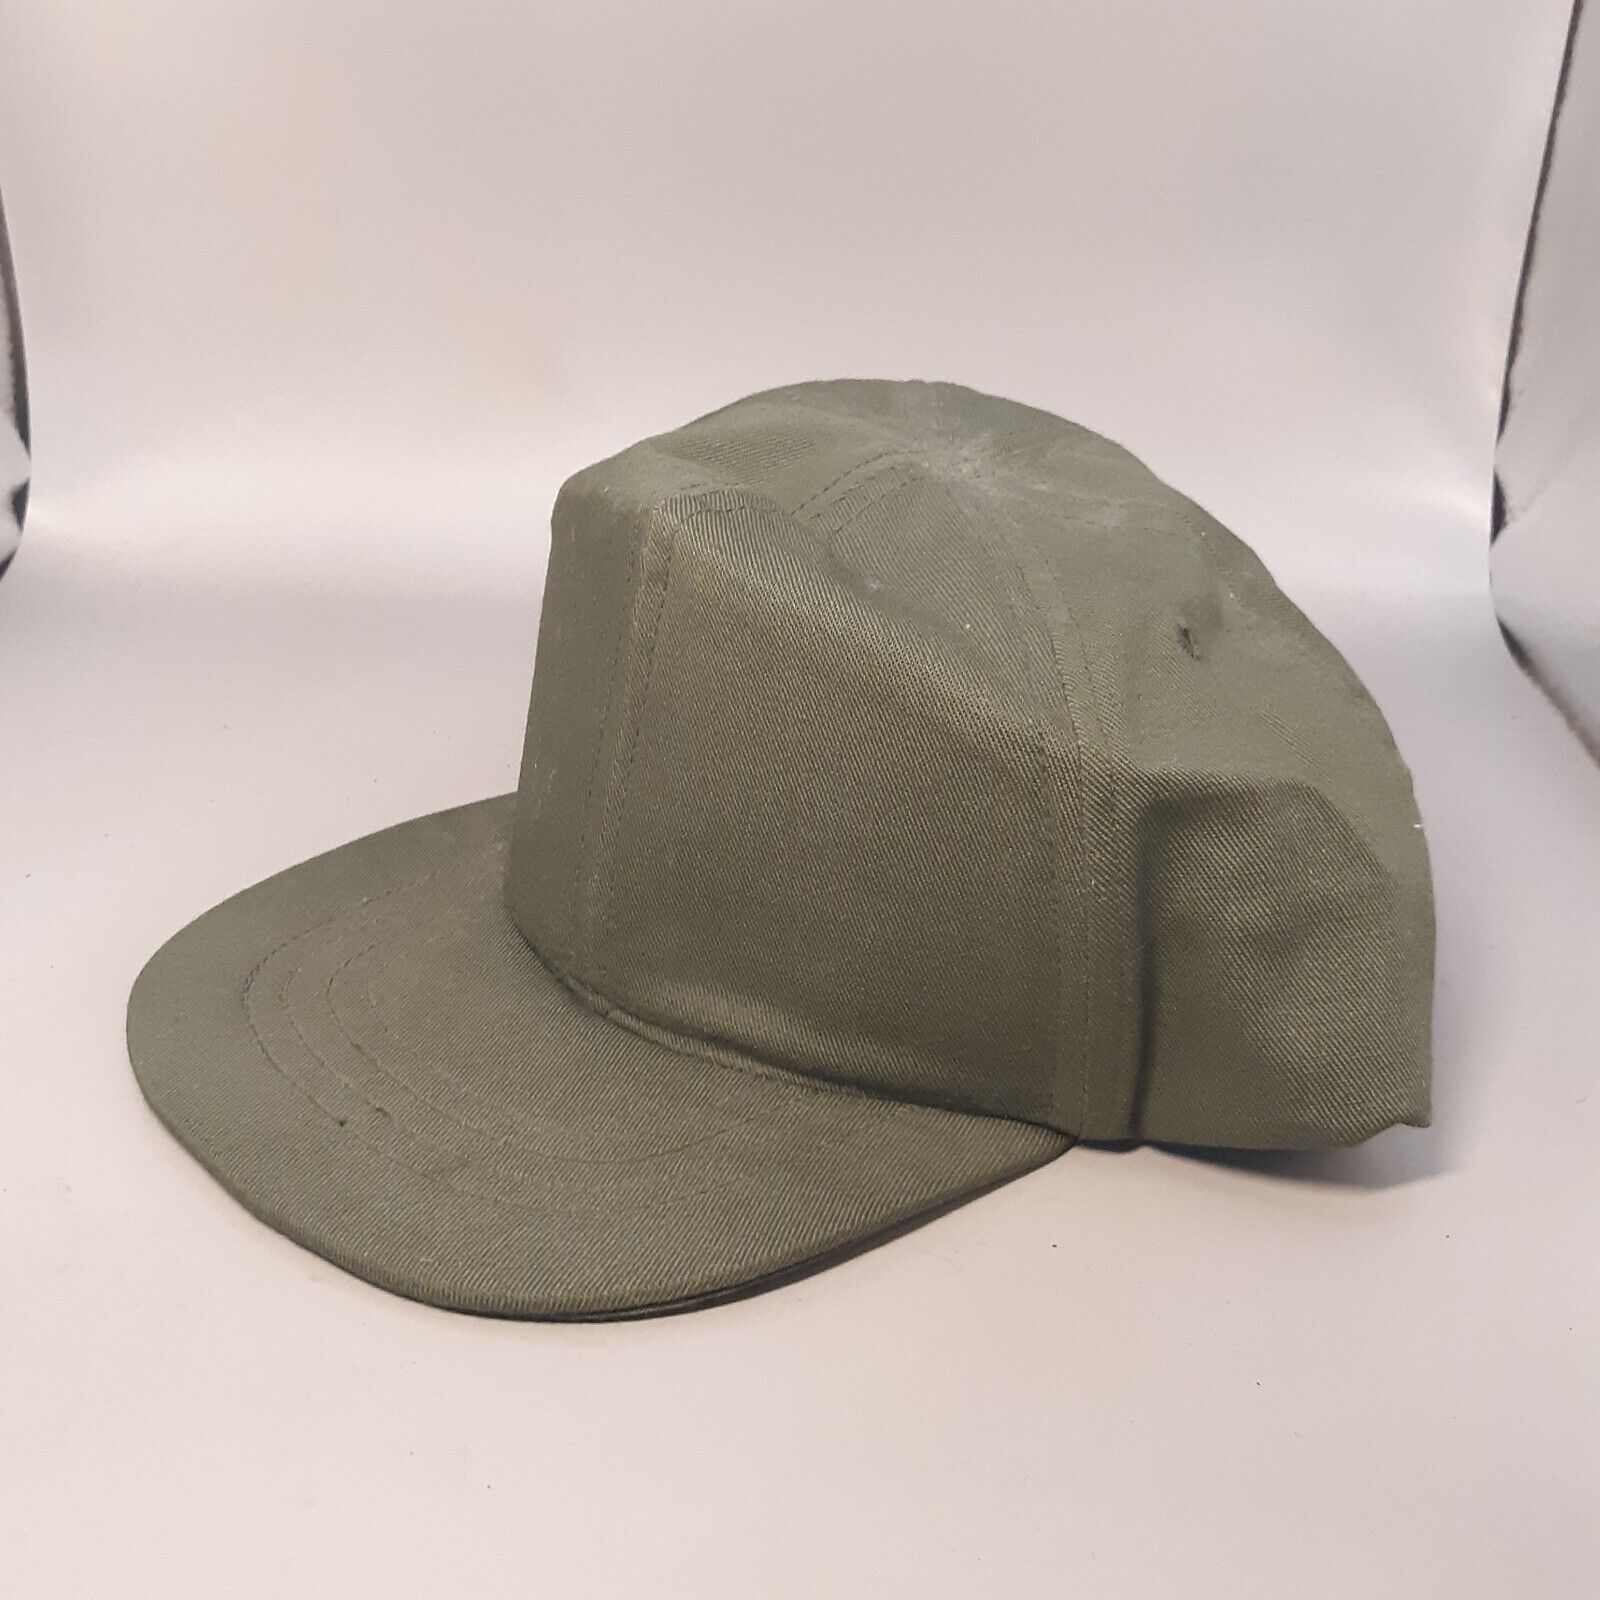 post-Vietnam US Army OG-507 Hot Weather Field or Baseball Cap - Size 6 7/8 MINT